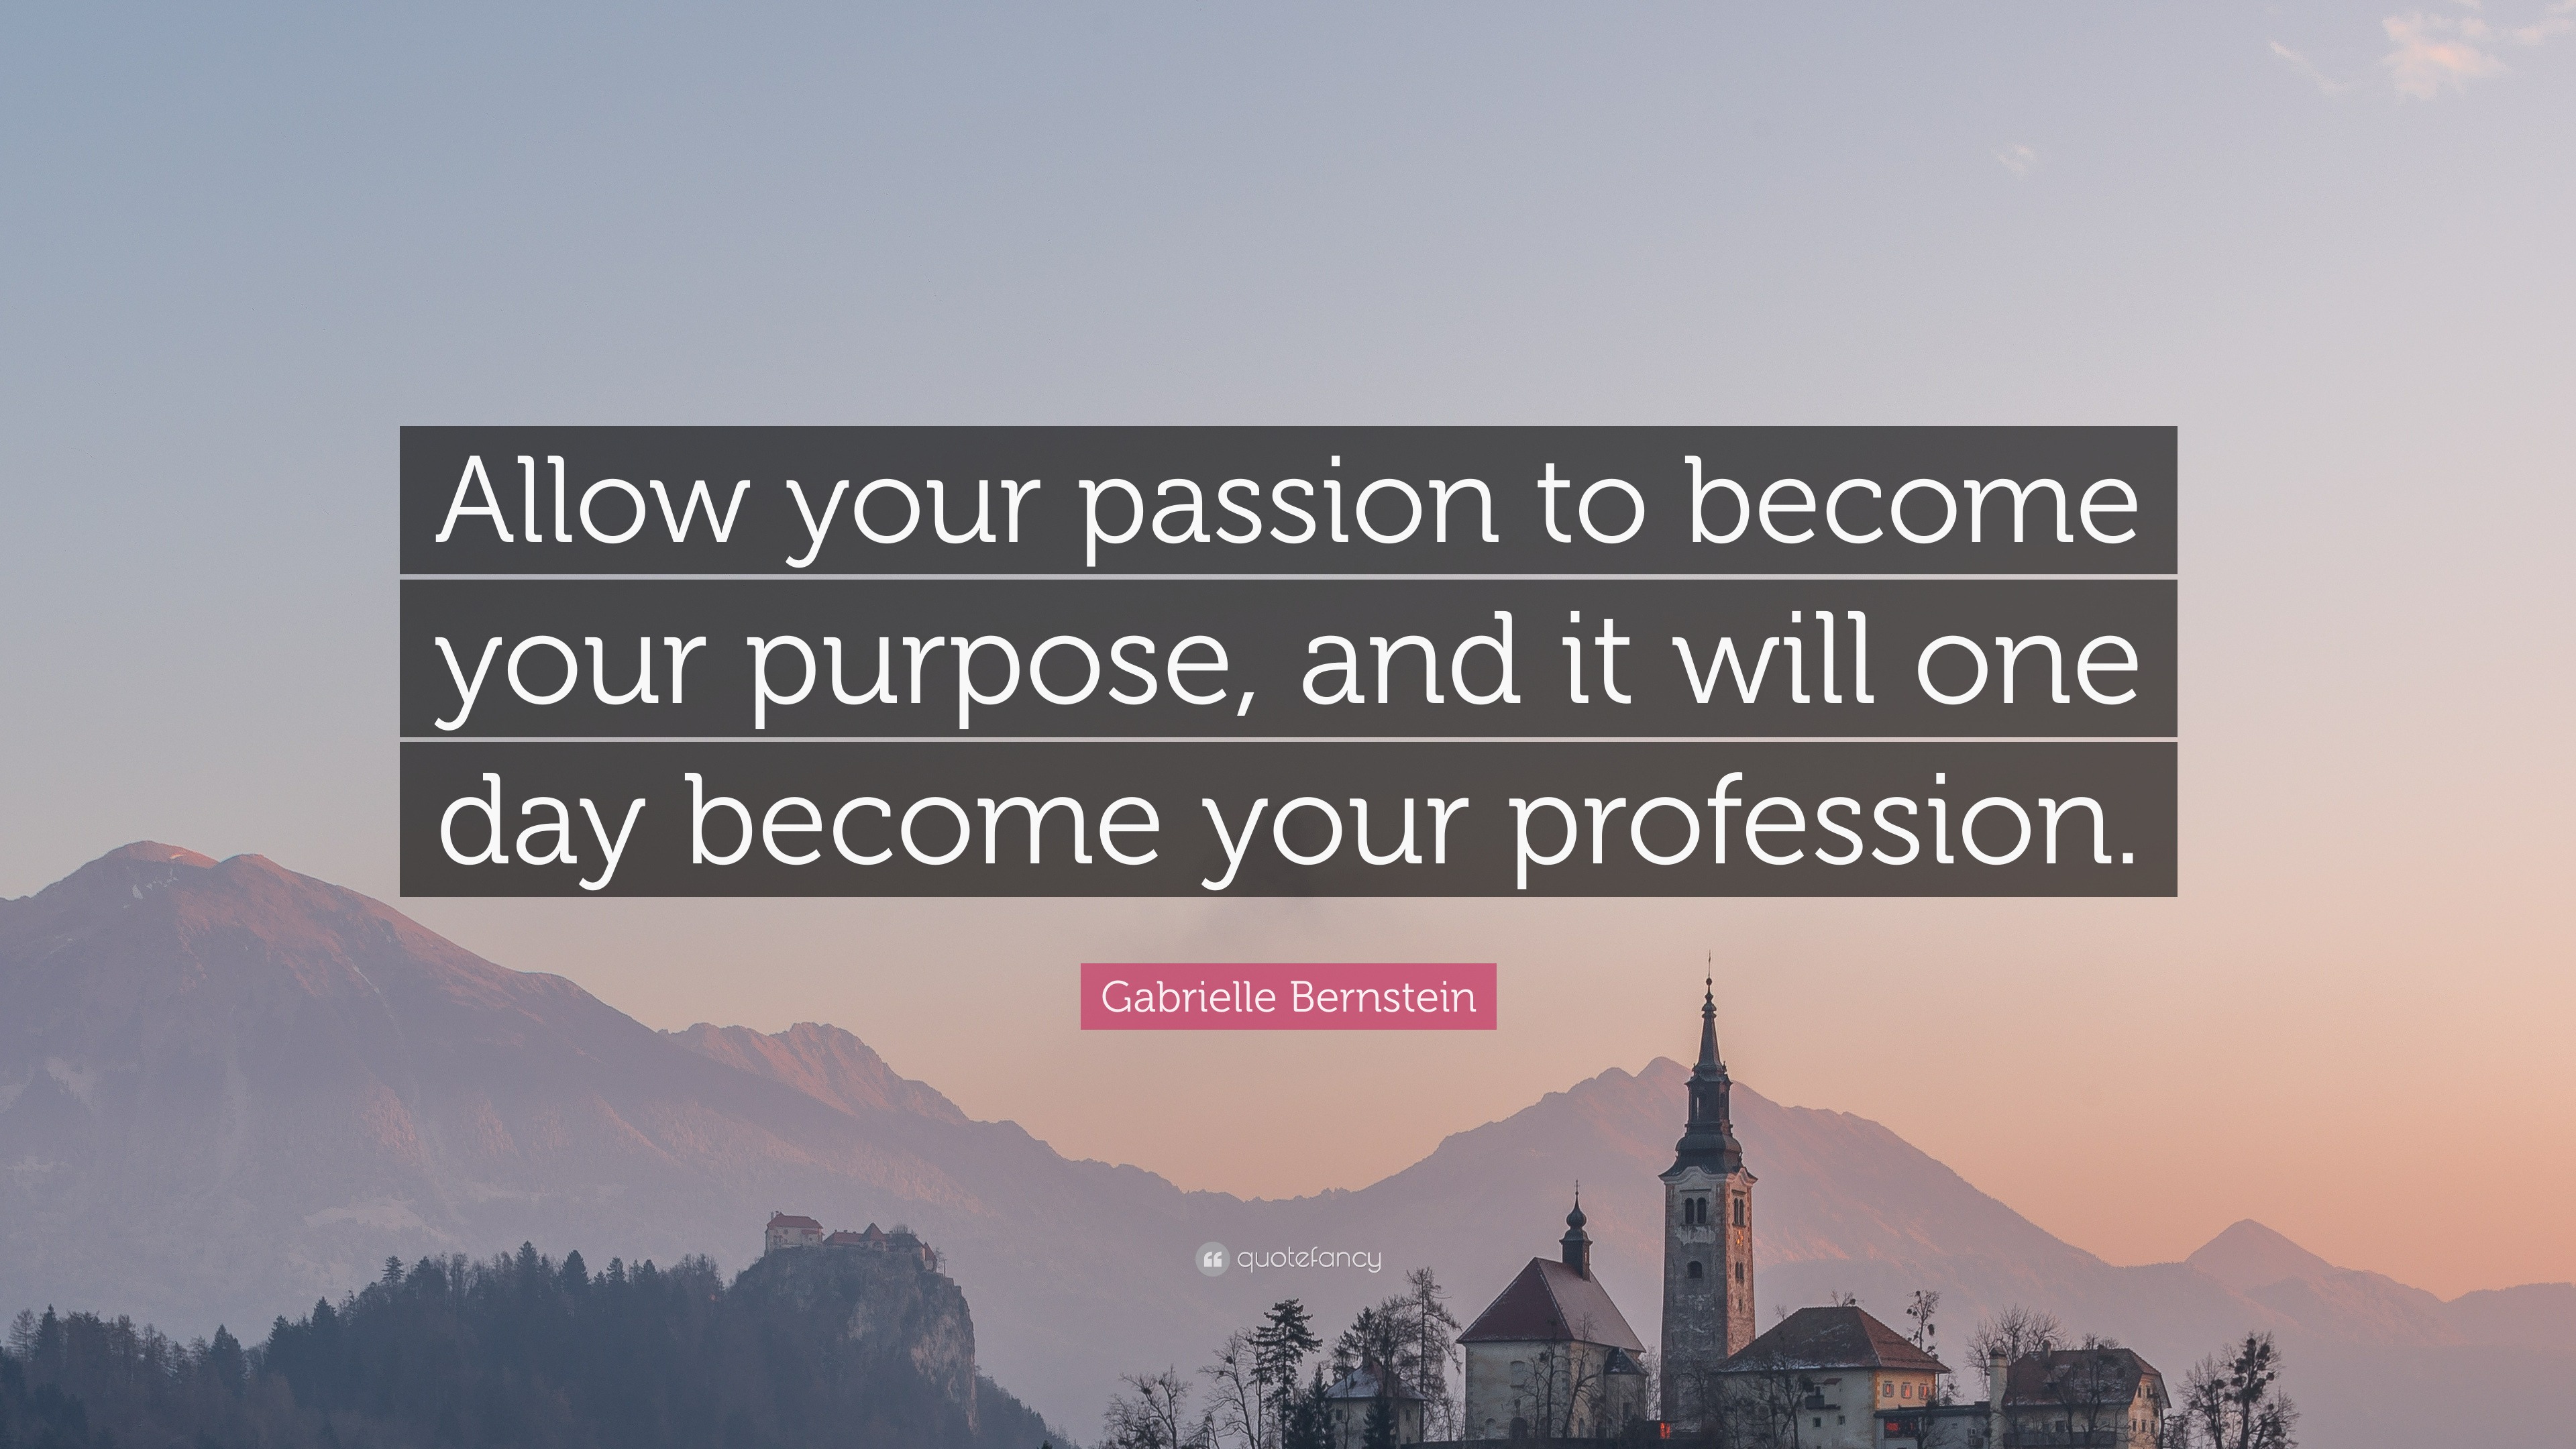 Gabrielle Bernstein Quote: “Allow your passion to become your purpose